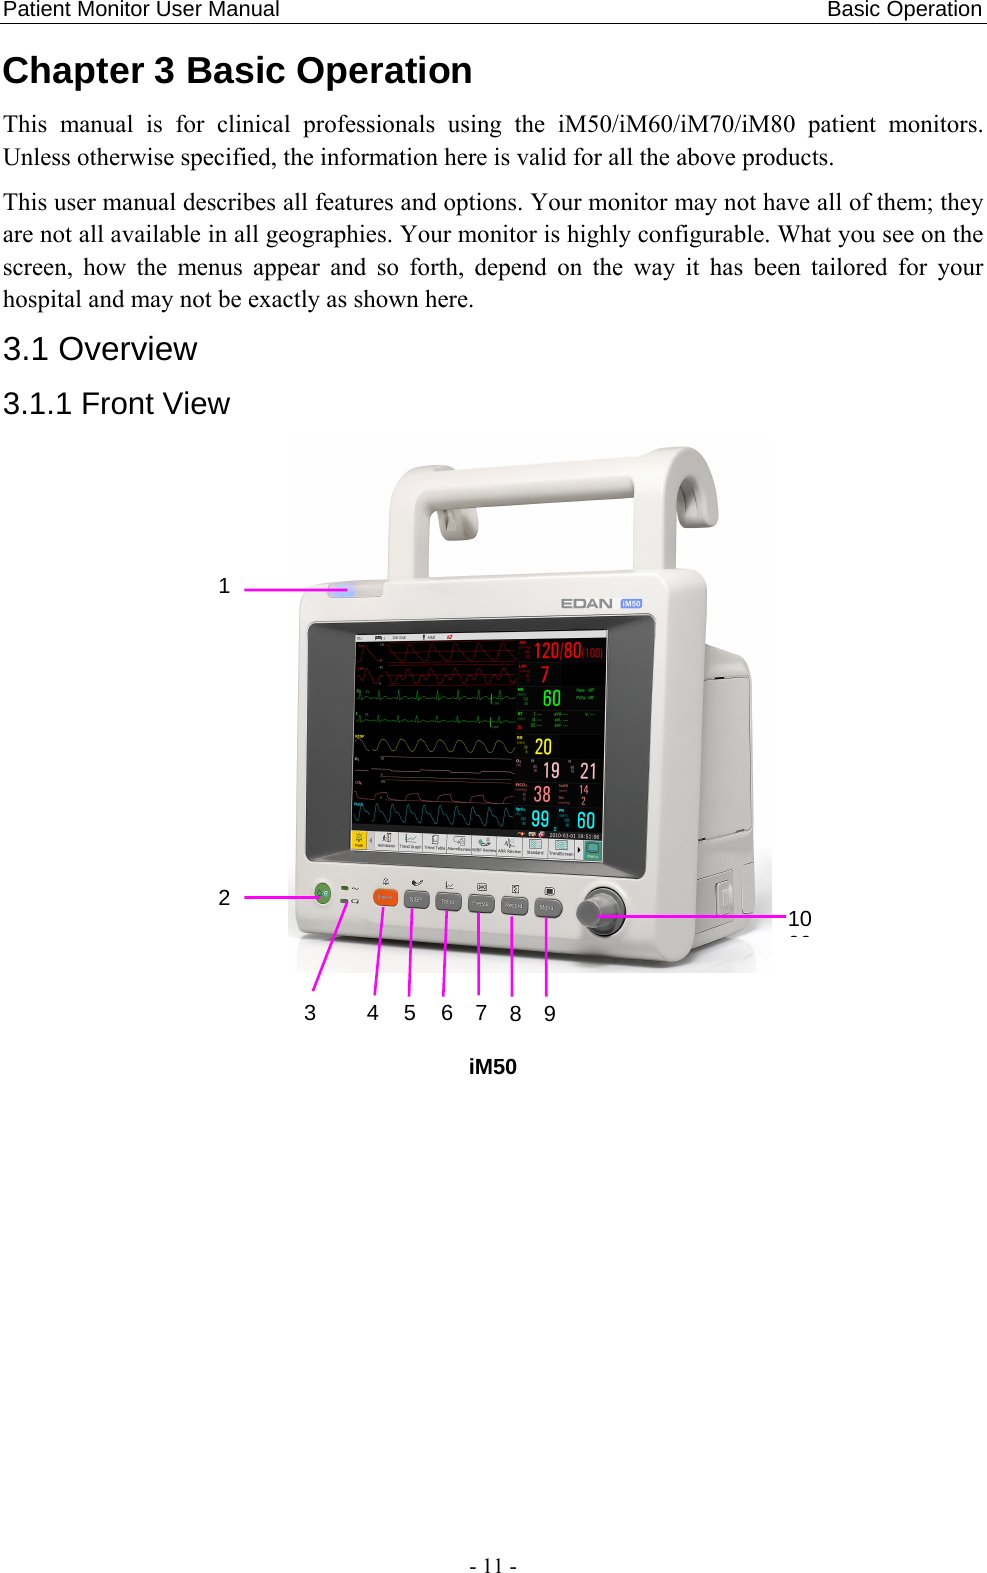 Patient Monitor User Manual                                                  Basic Operation  - 11 - Chapter 3 Basic Operation This manual is for clinical professionals using the iM50/iM60/iM70/iM80 patient monitors. Unless otherwise specified, the information here is valid for all the above products.   This user manual describes all features and options. Your monitor may not have all of them; they are not all available in all geographies. Your monitor is highly configurable. What you see on the screen, how the menus appear and so forth, depend on the way it has been tailored for your hospital and may not be exactly as shown here. 3.1 Overview 3.1.1 Front View  iM50 1 2 3 4 5 6 7891000